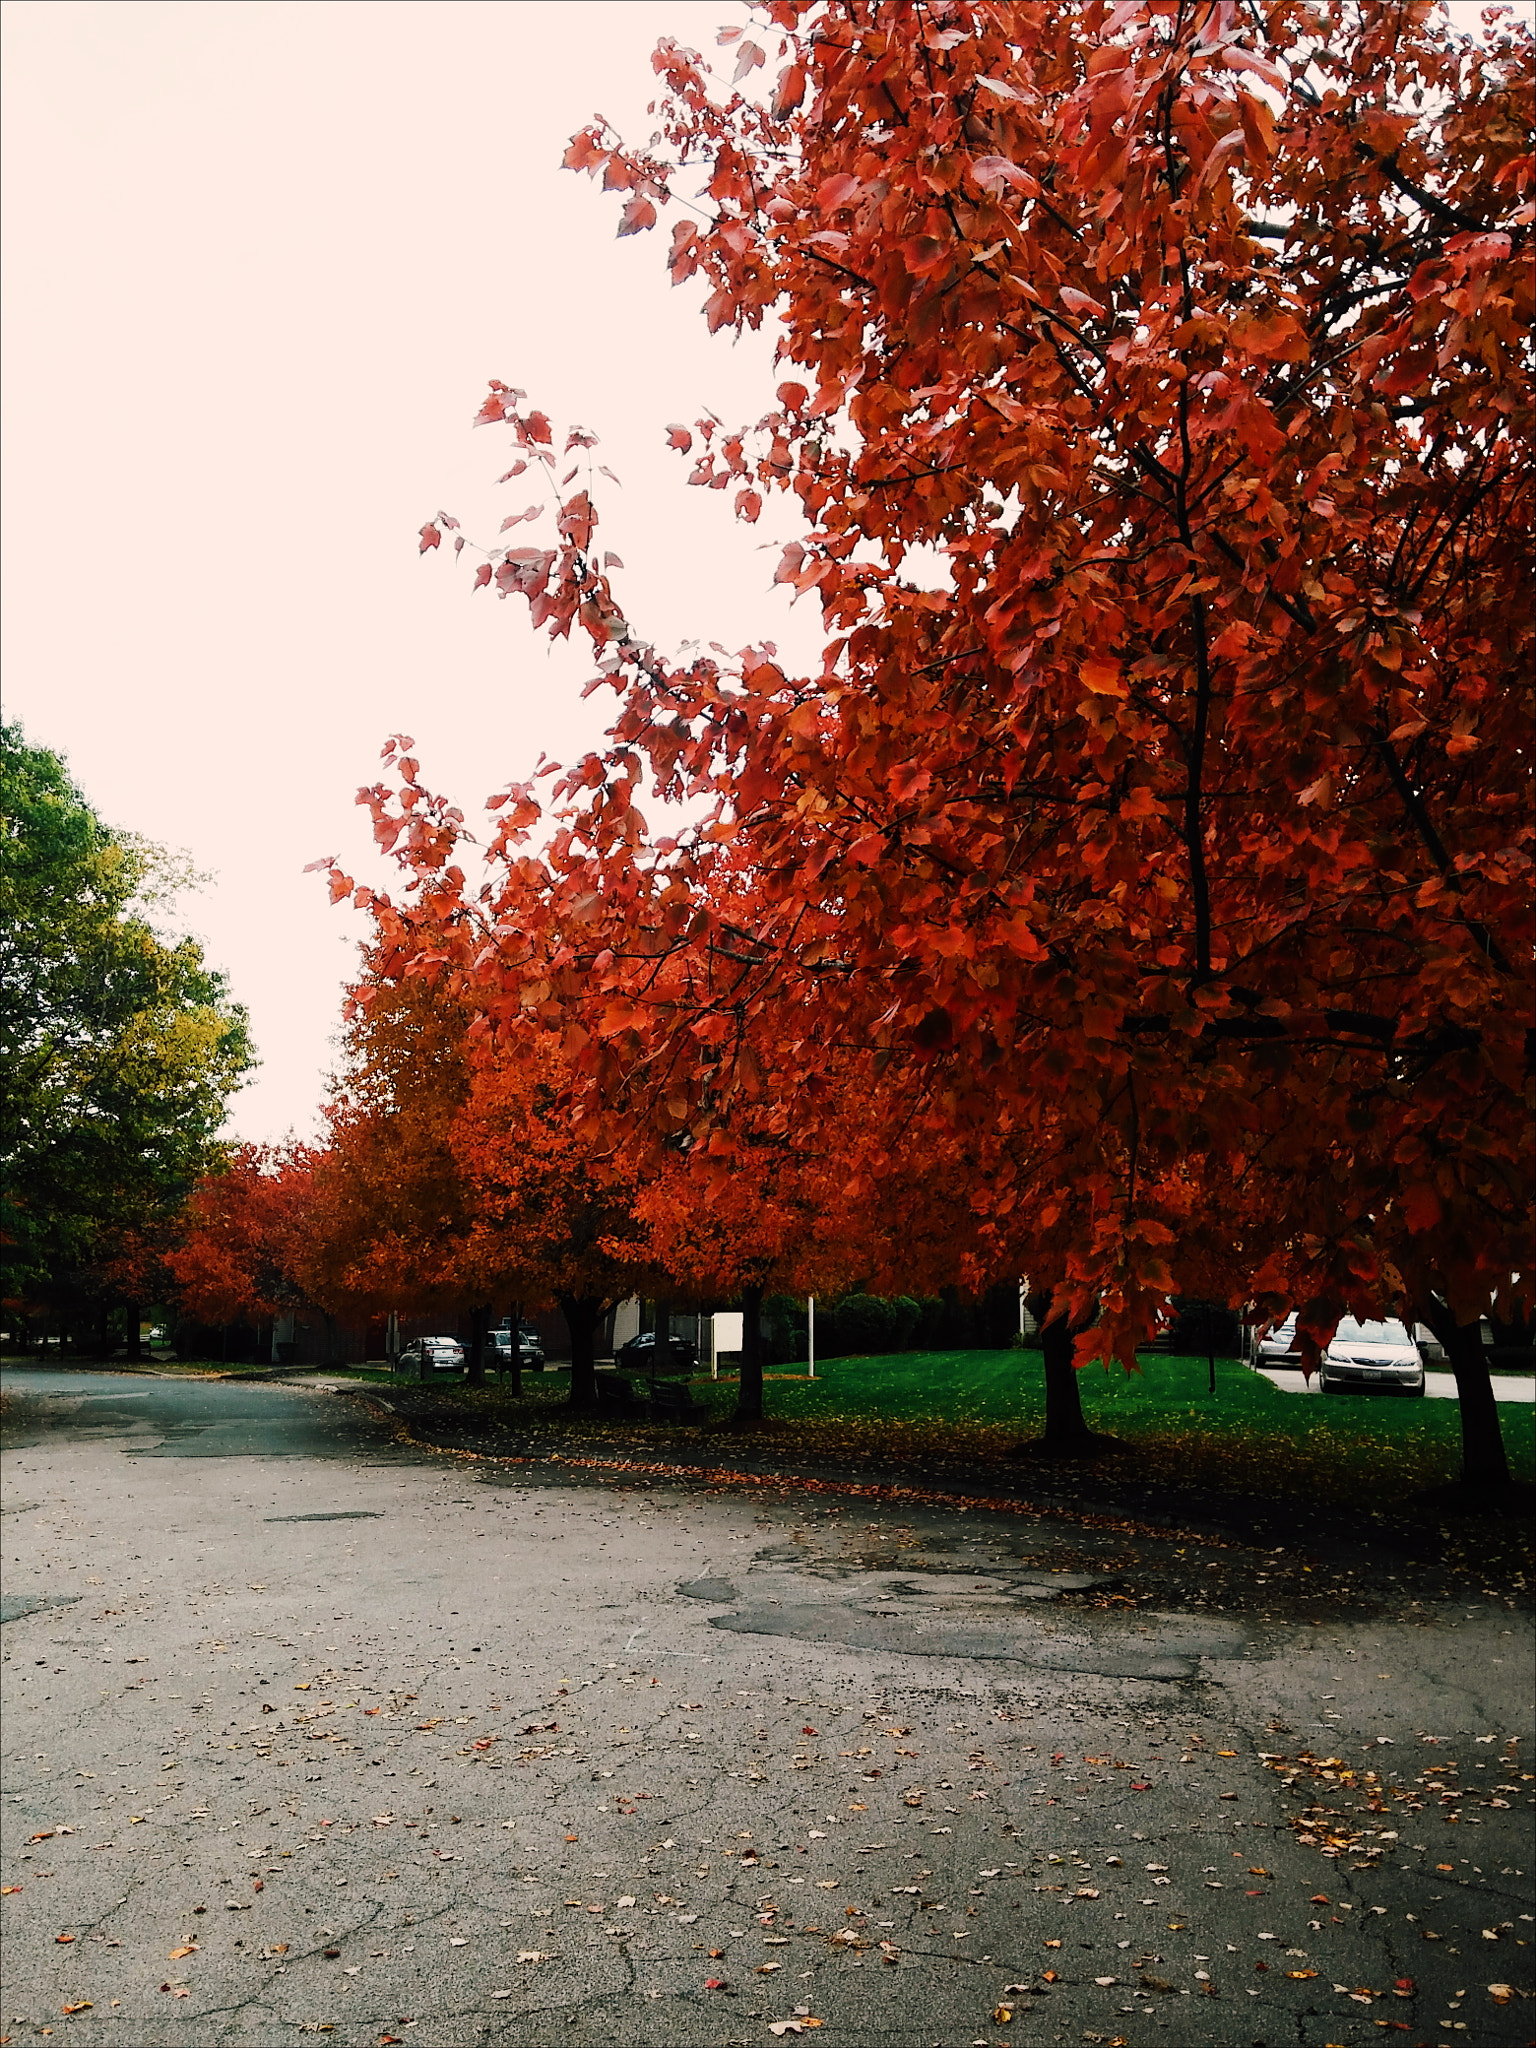 LG G STYLO sample photo. In love with fall photography